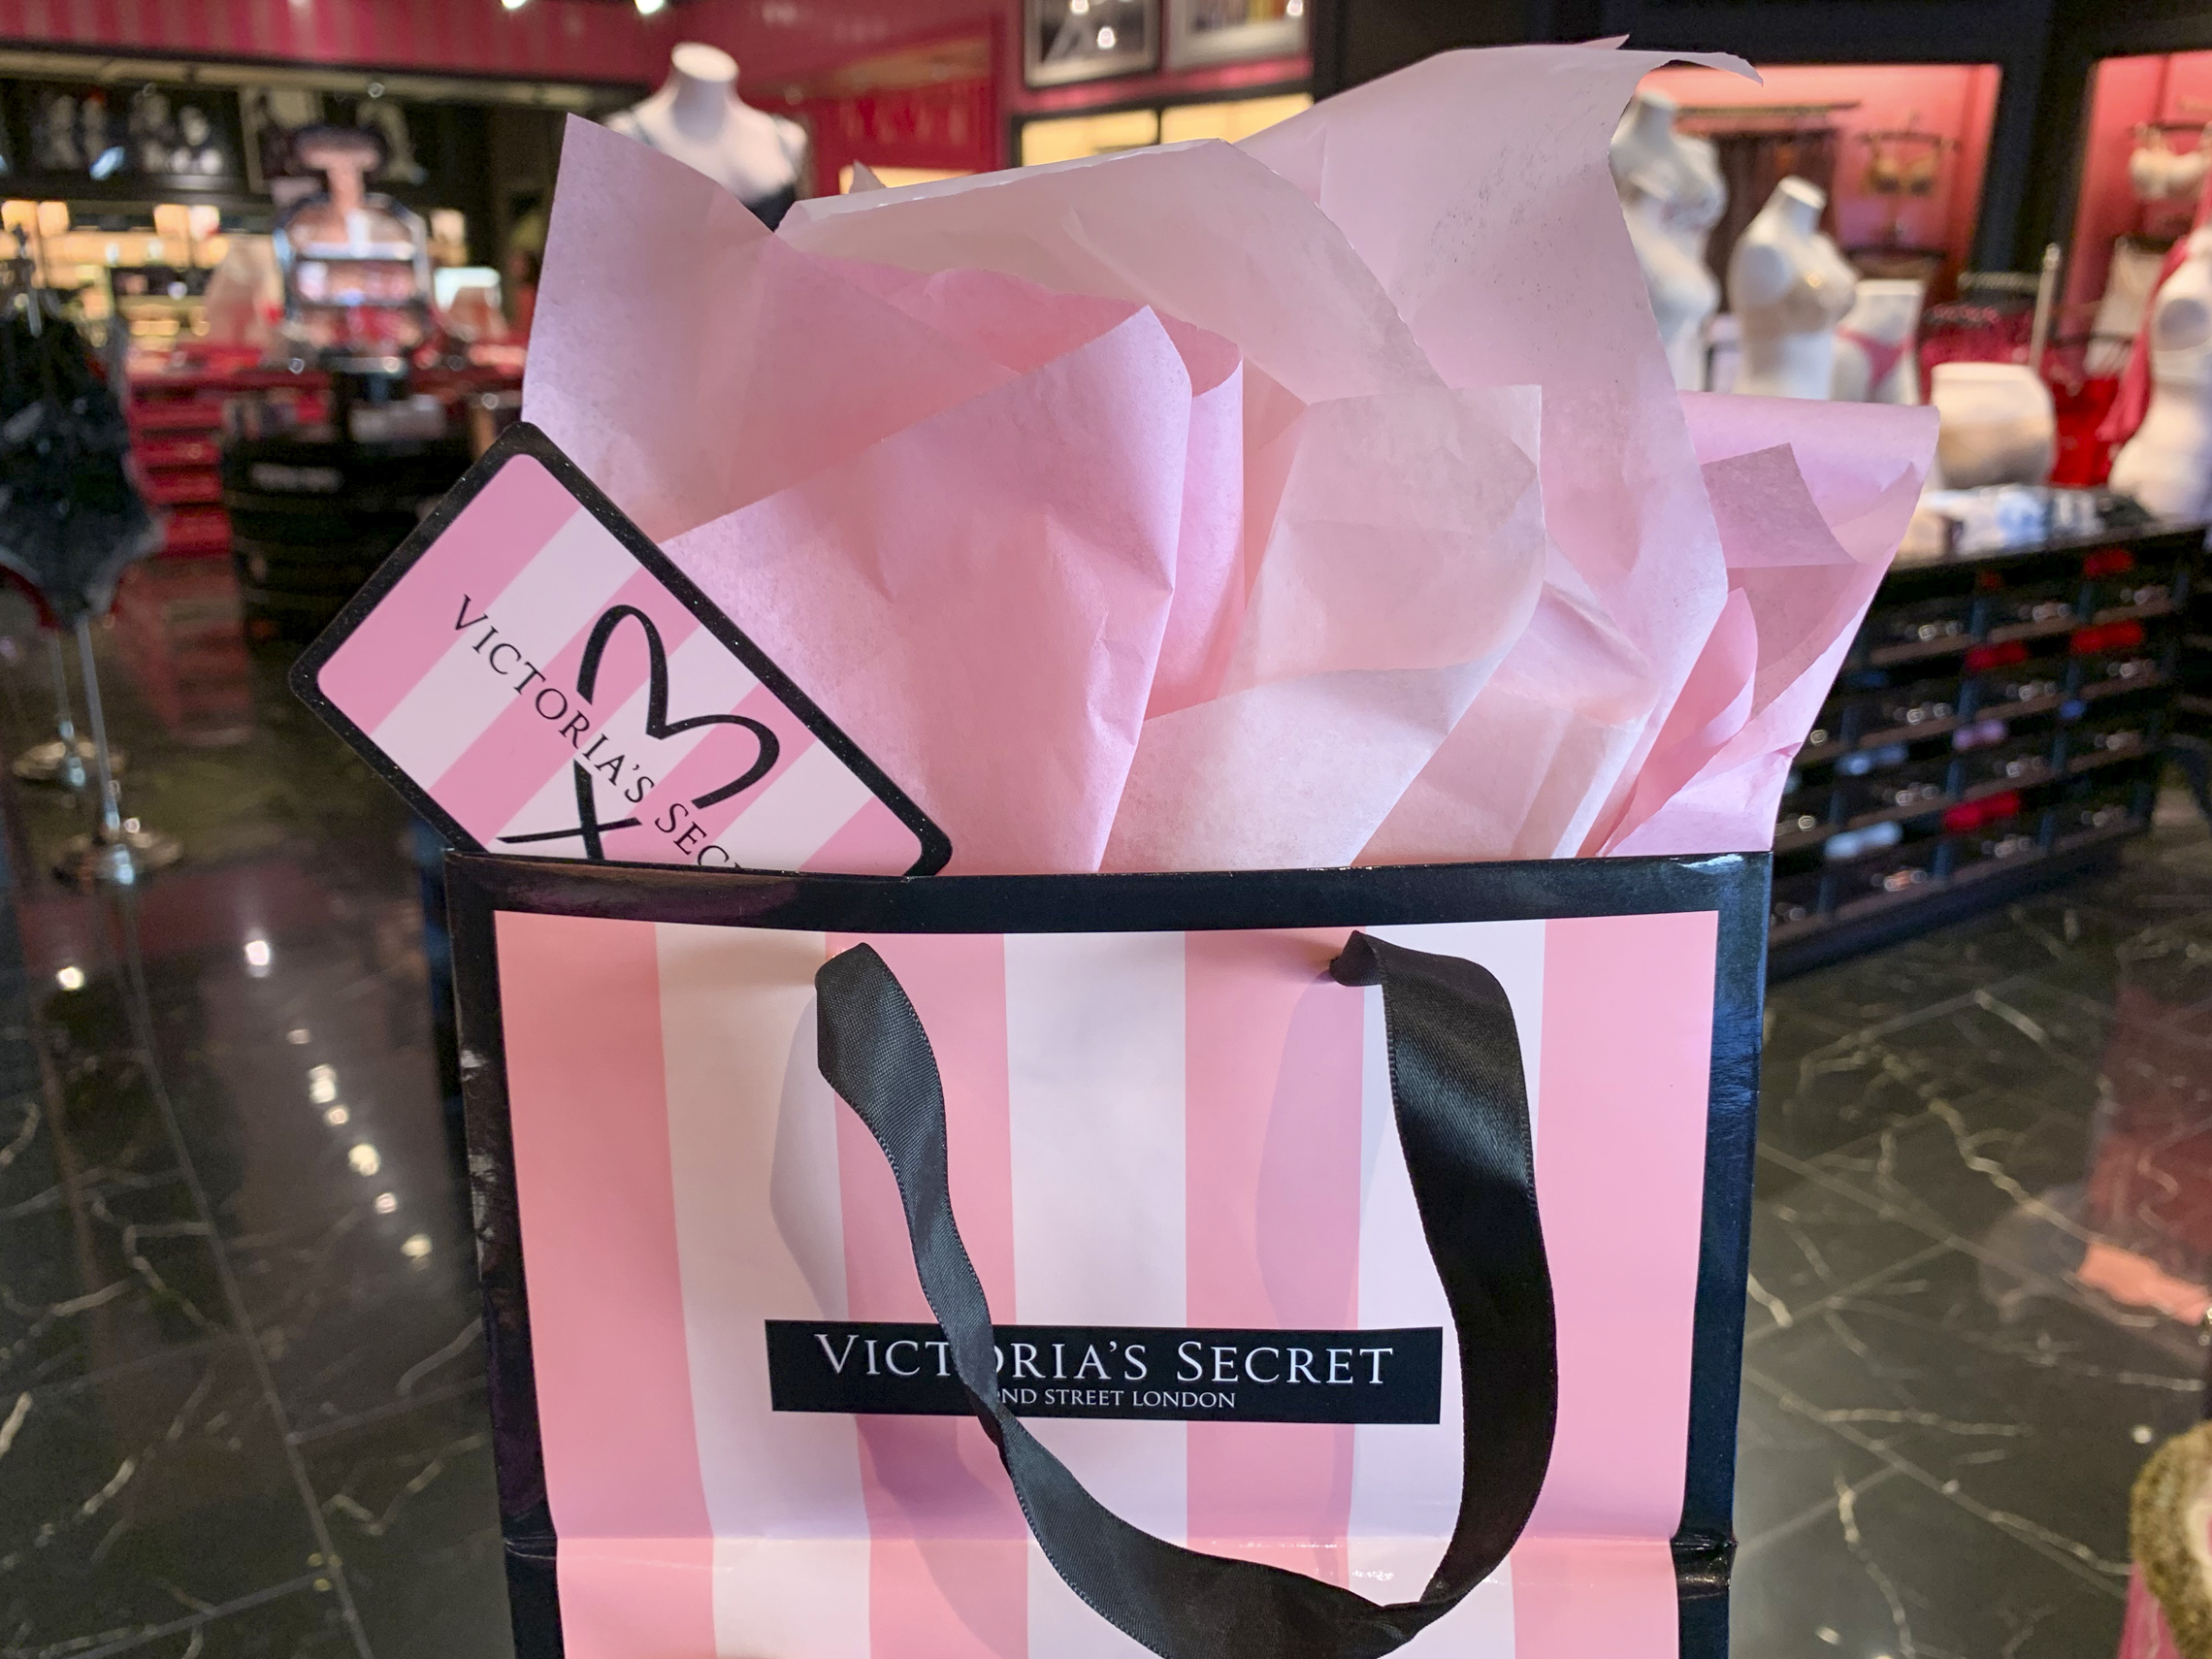 💃Victoria's Secret Buy 2 Get 2 FREE Everything (Panties $1.49, Bras $3.99  Each!)! Deal ends on December 18th! 👆 Find the direct